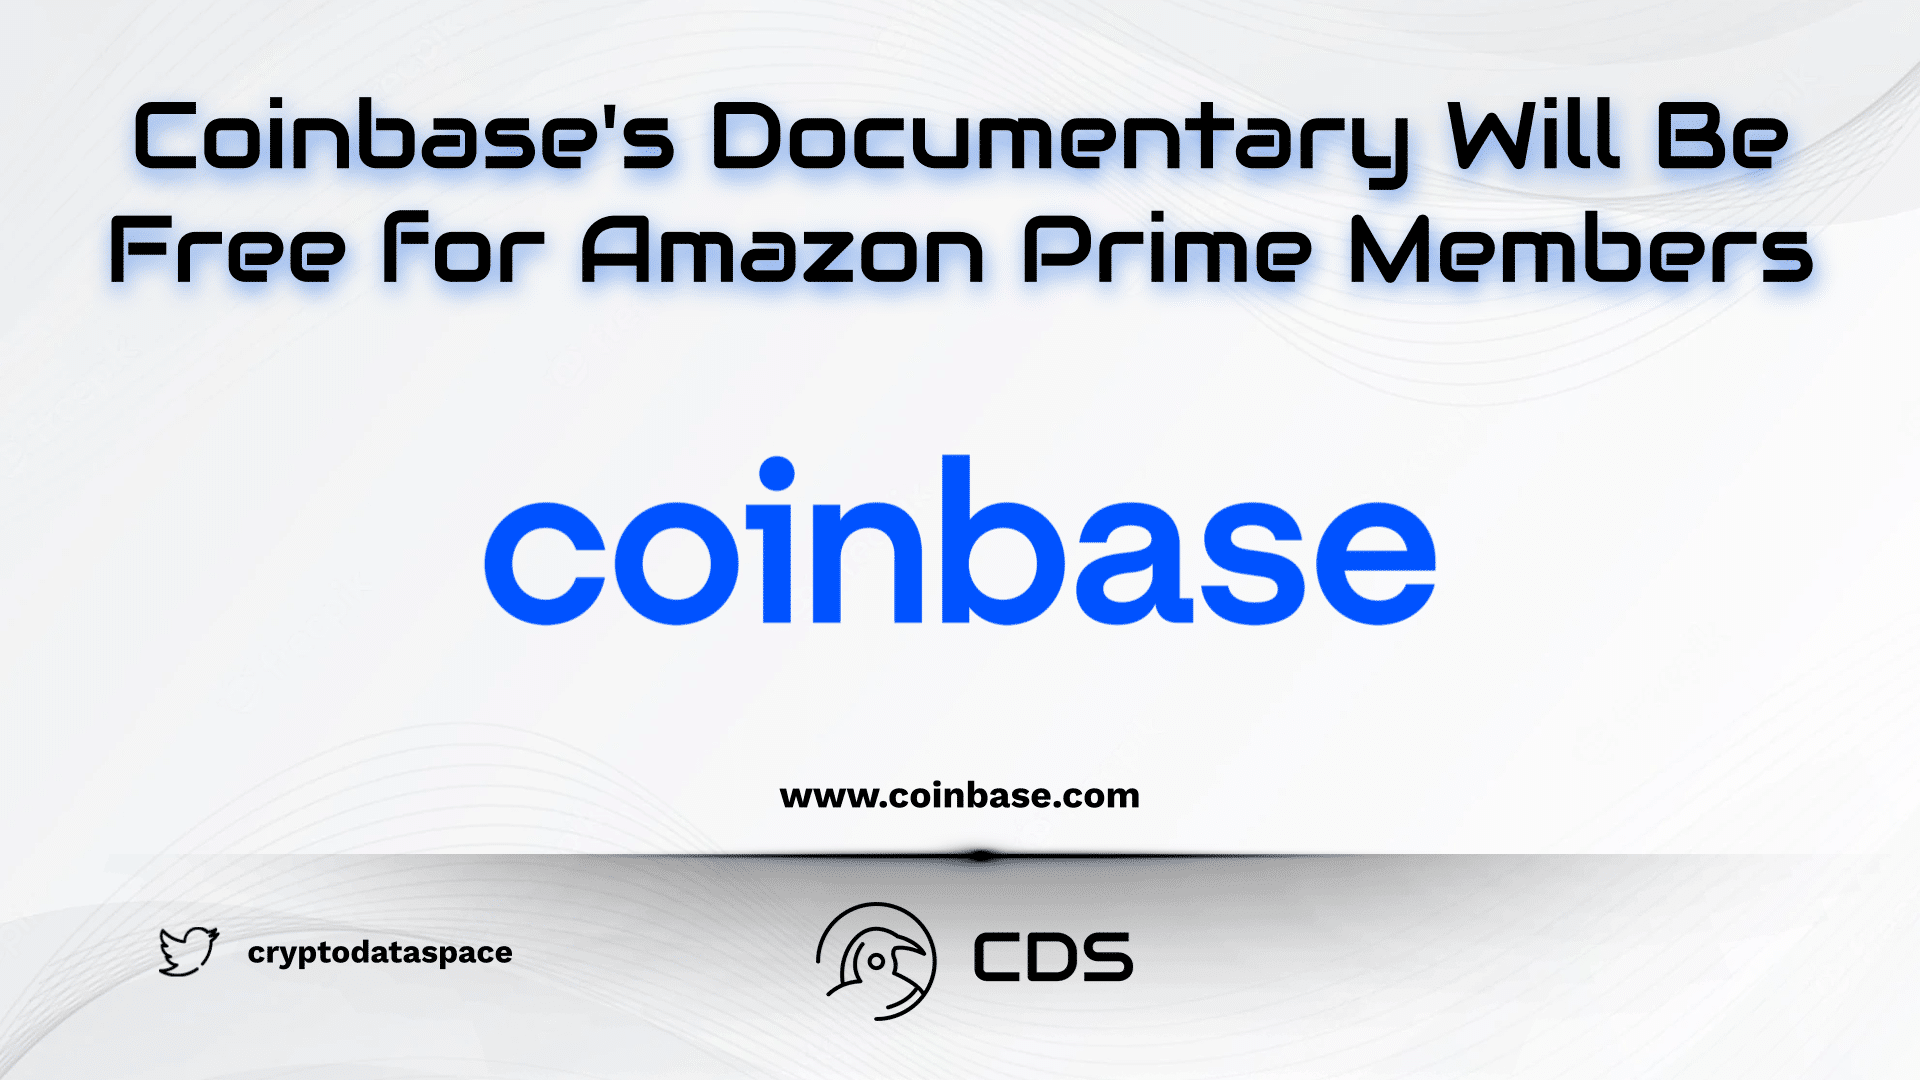 Coinbase's Documentary Will Be Free for Amazon Prime Members